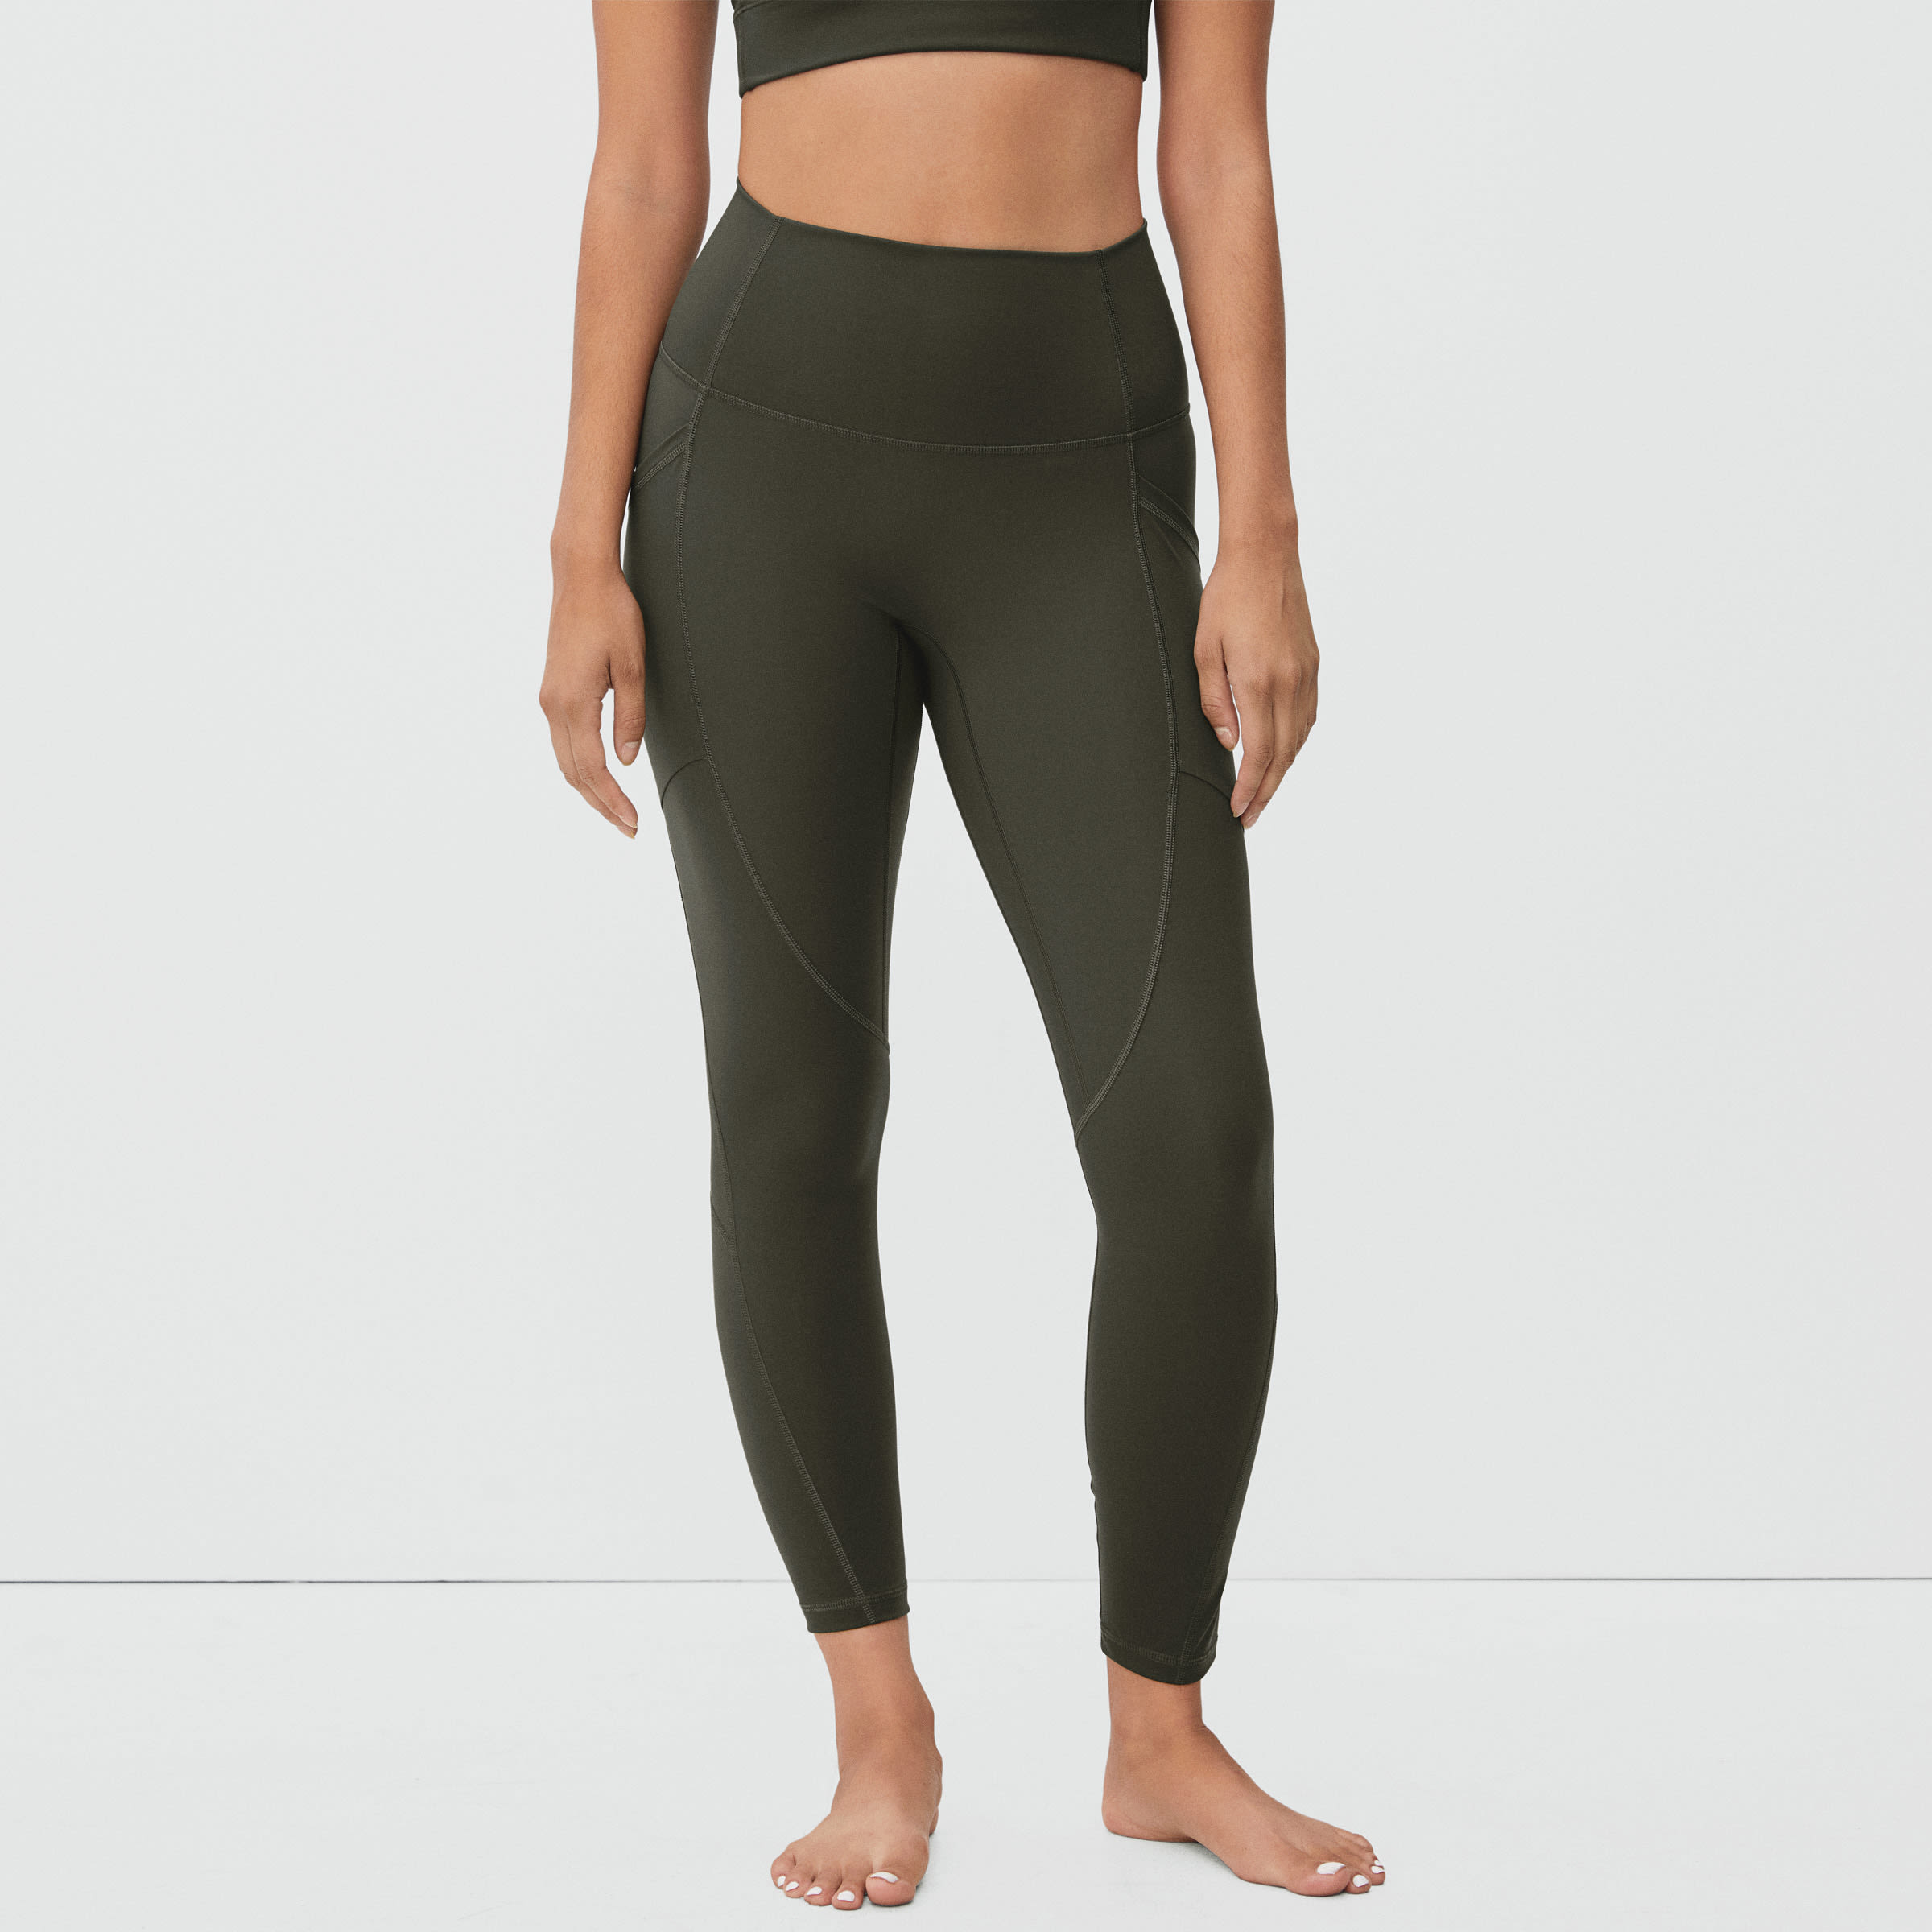 Everlane The Perform Renew Black Athletic Leggings XS - $58 New With Tags -  From Lily